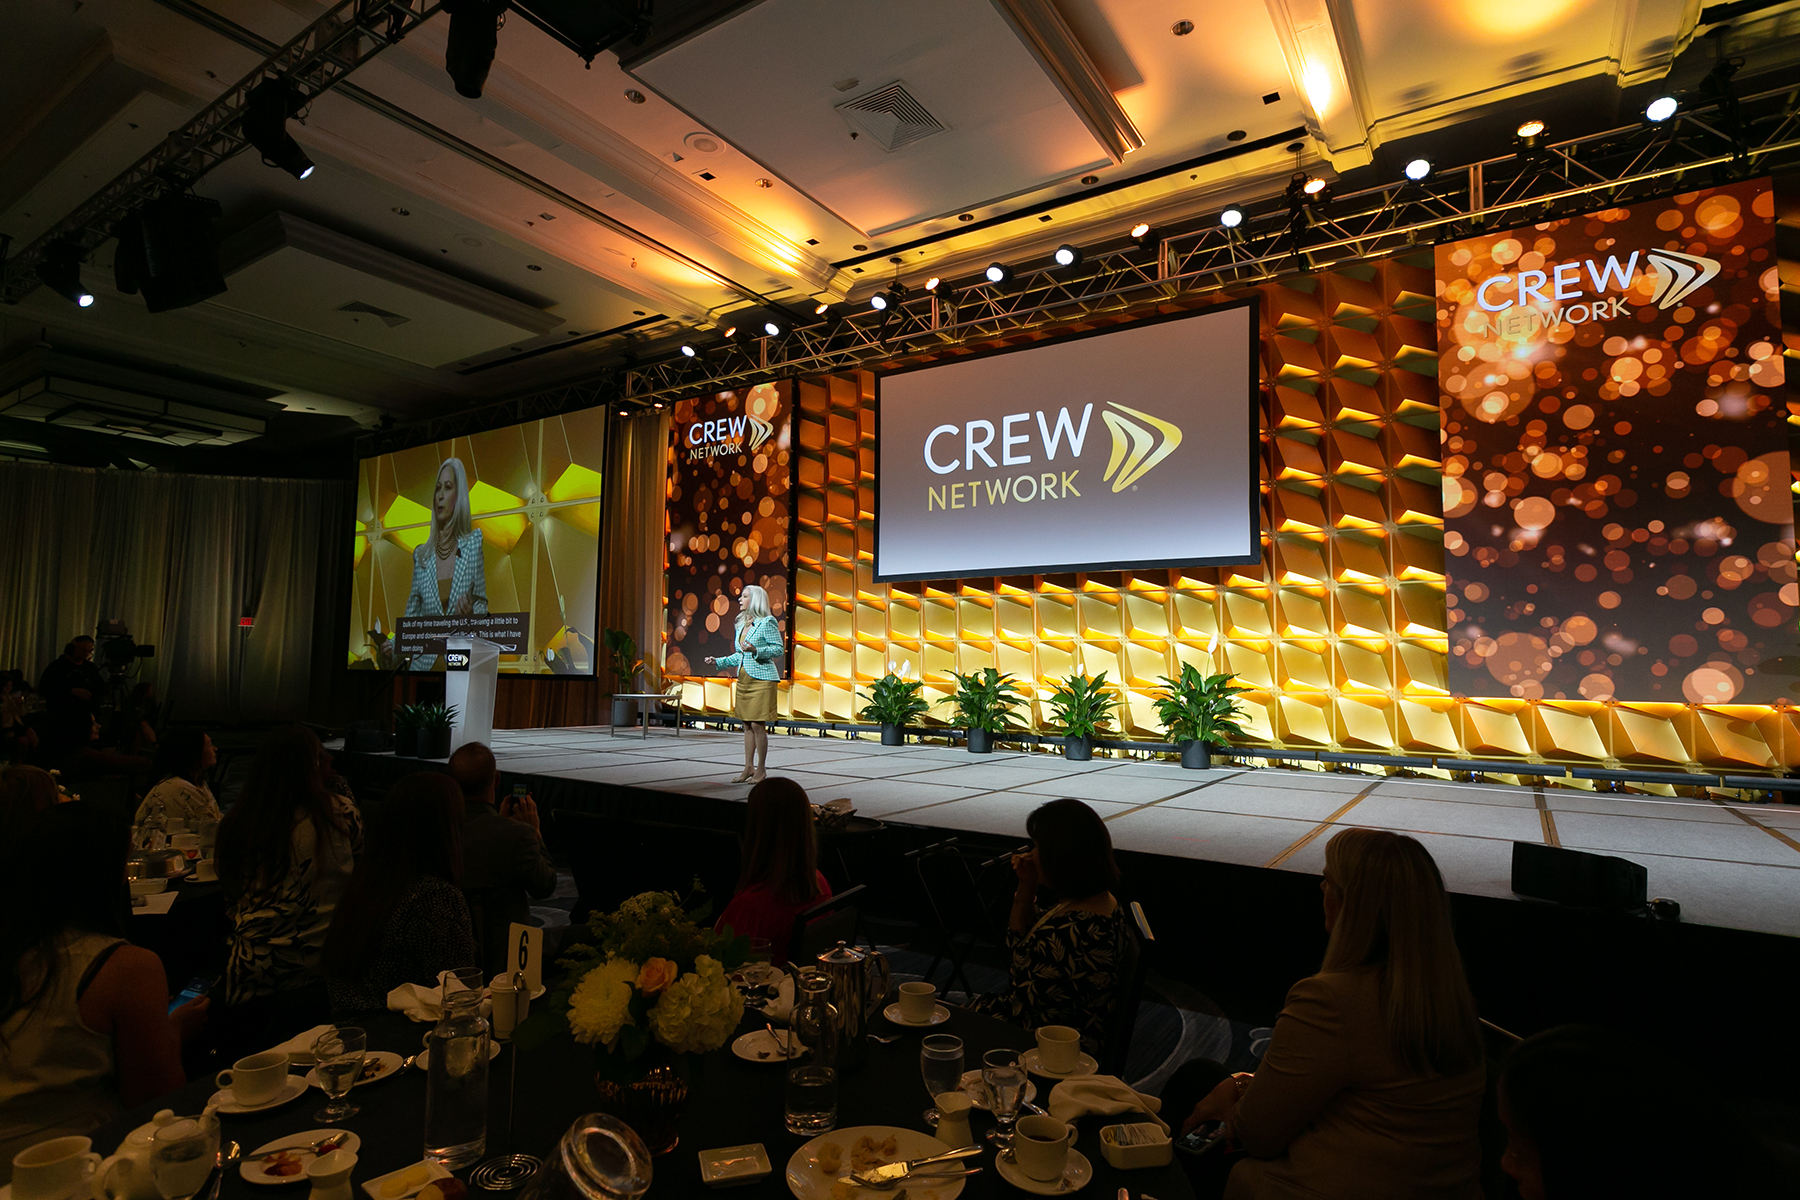 CREW Network event speaker on a well decorated stage